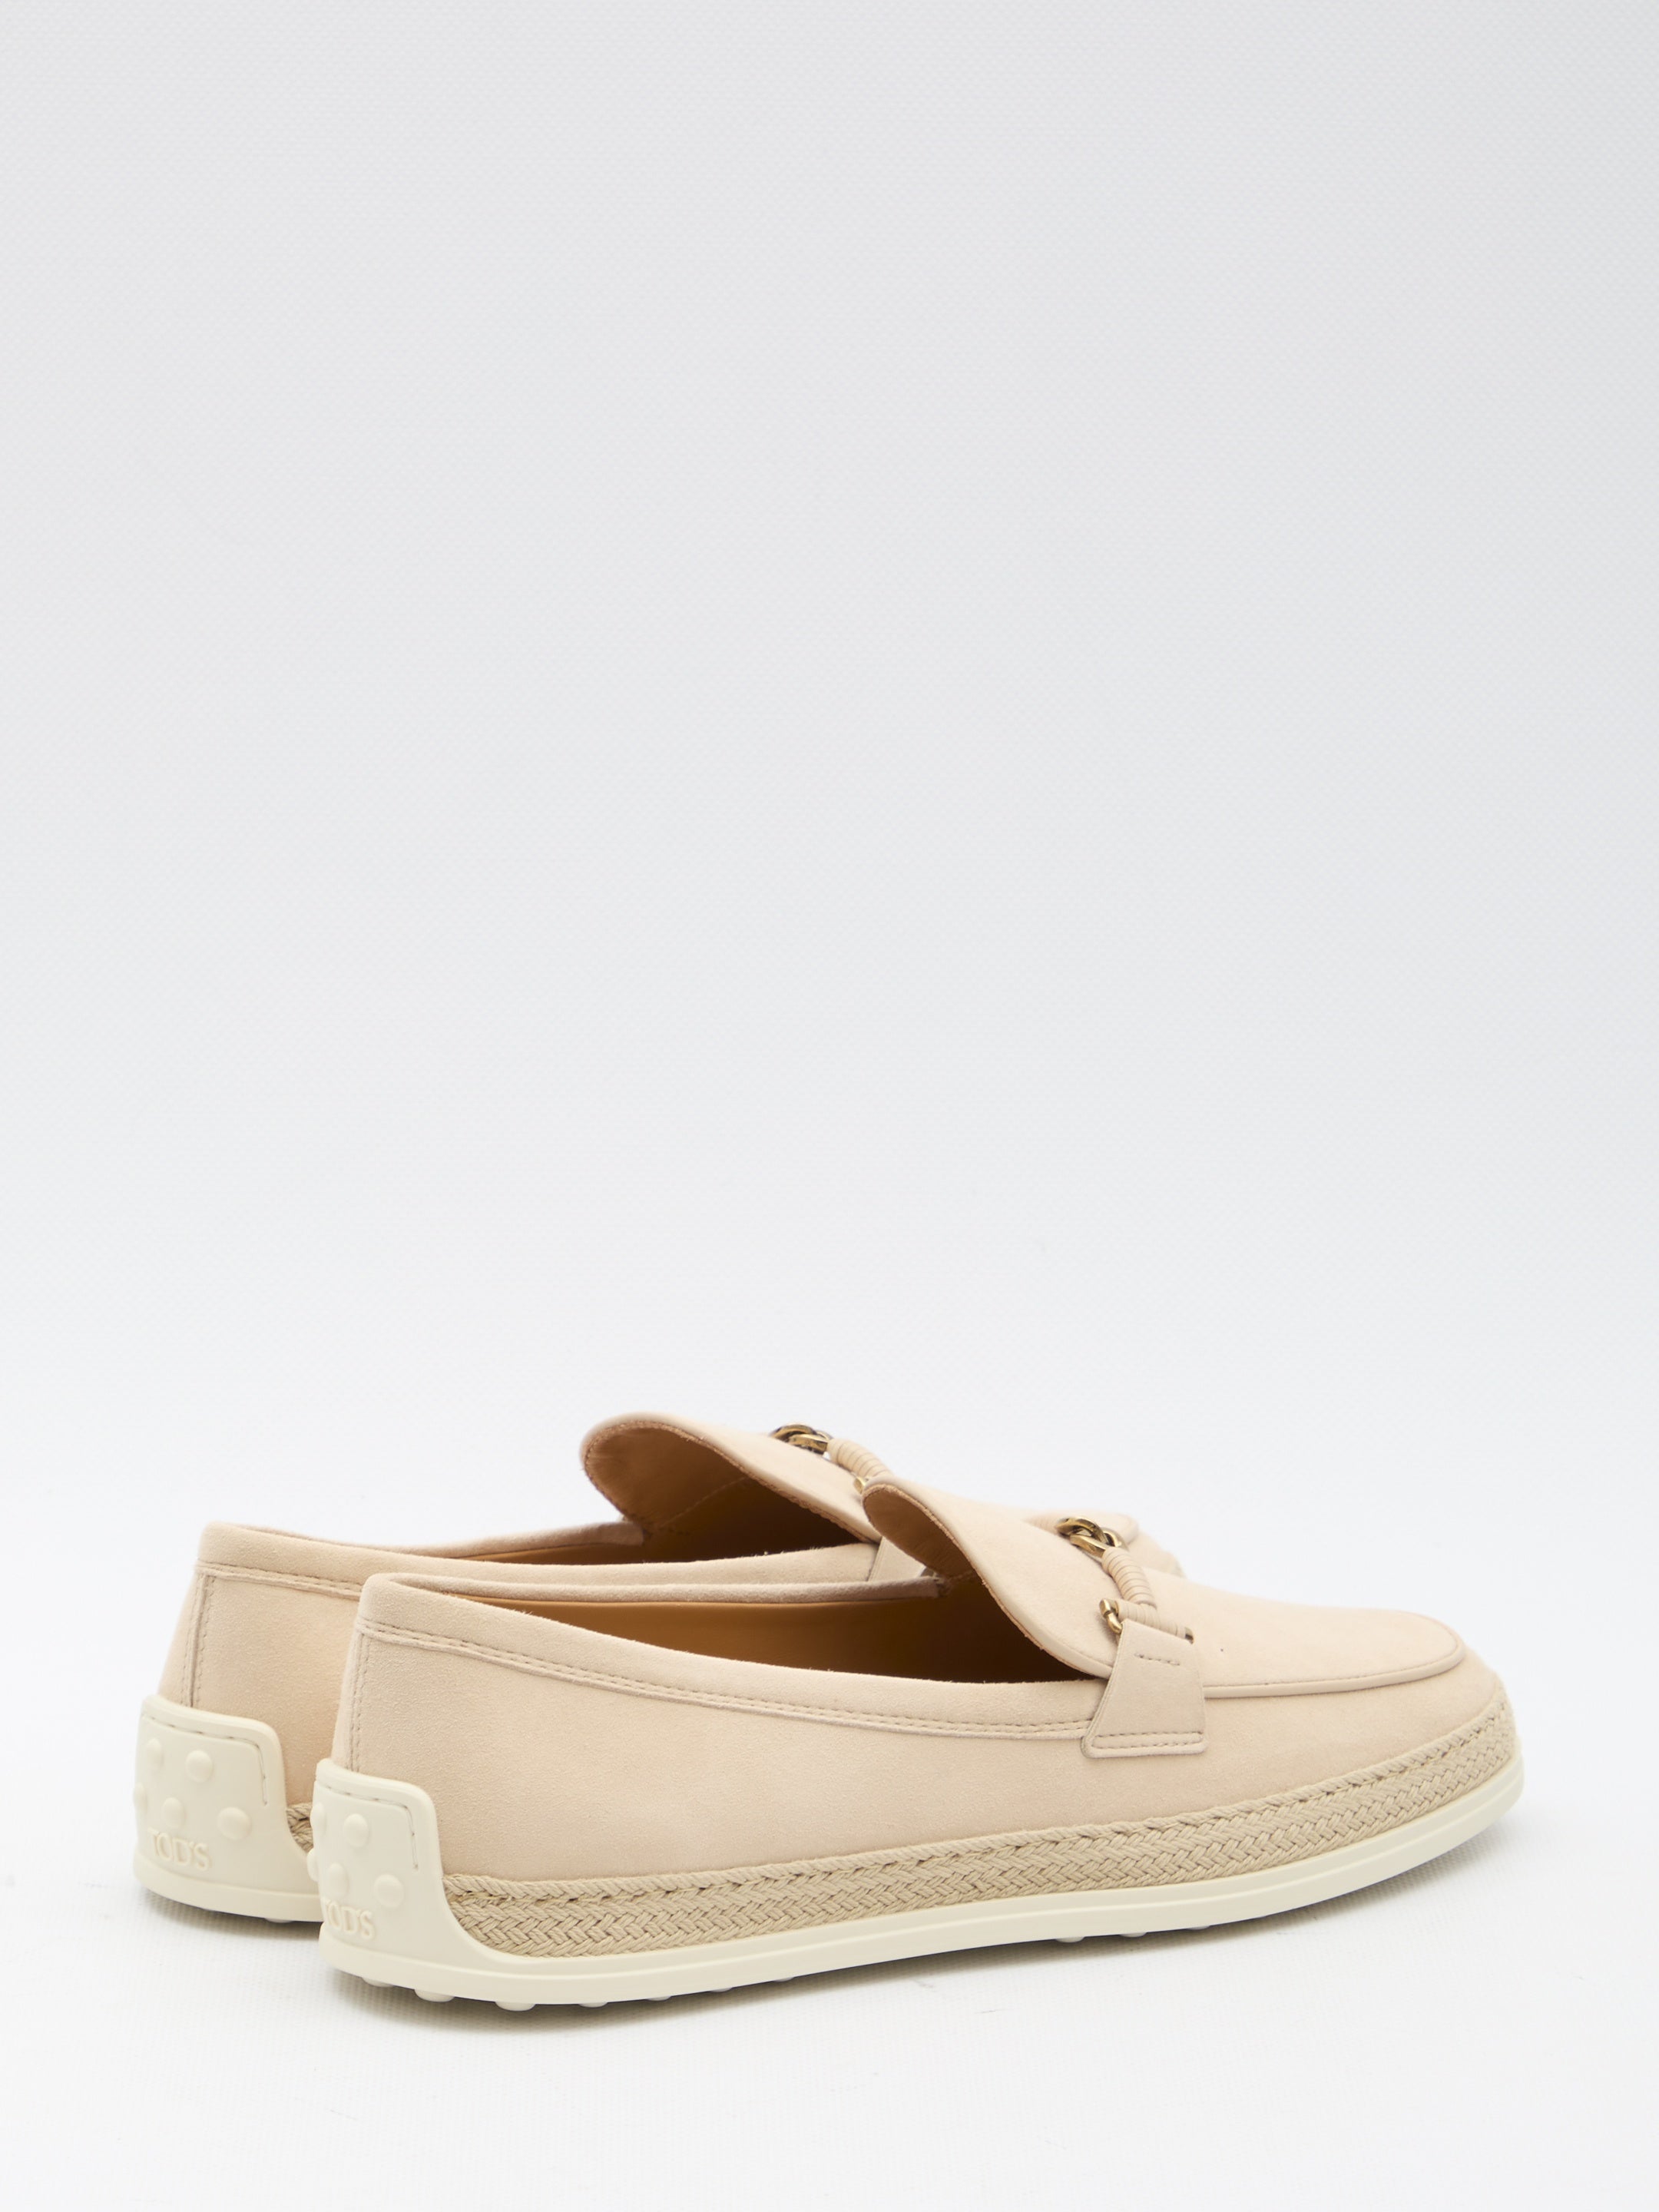 TODS-OUTLET-SALE-Suede-loafers-Flache-Schuhe-ARCHIVE-COLLECTION-3_f74067fc-43b9-4189-85fb-d7d5f651c727.jpg